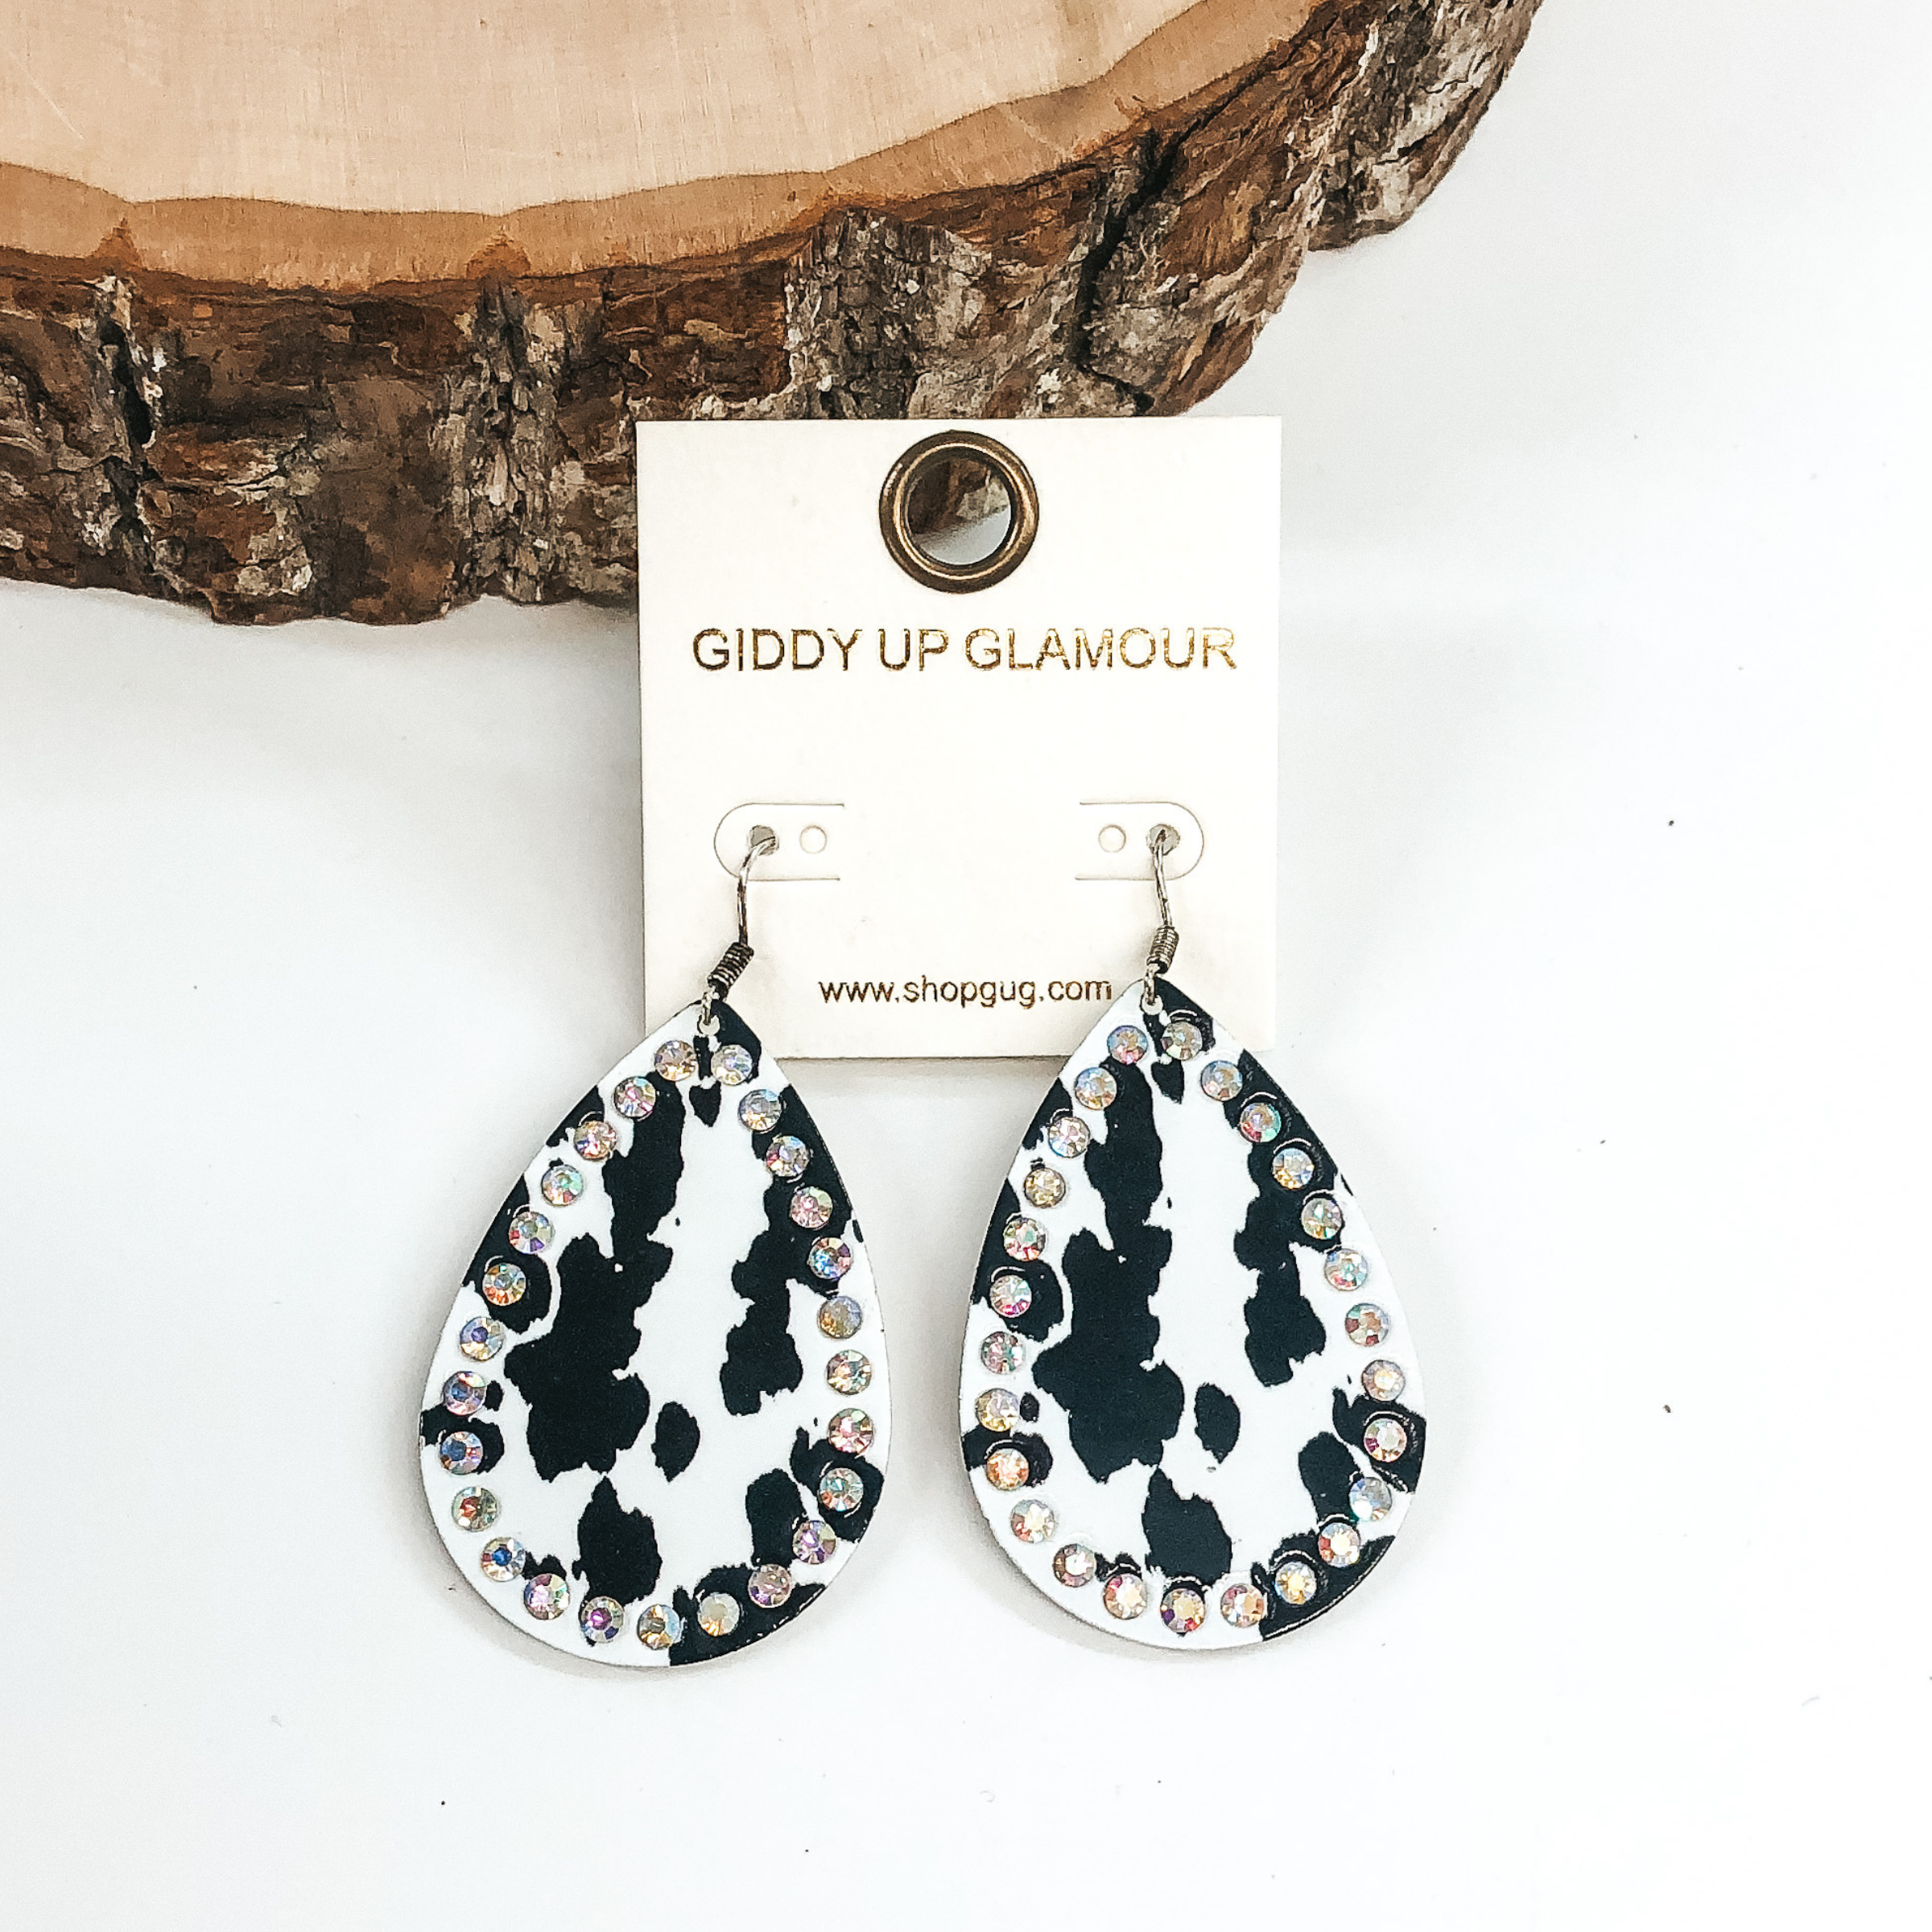 These are teardrop dangle earrings. These earrings have a black cow hide print with an AB crystal outline. These earrings are pictured on a white background with wood at the top of the picture.